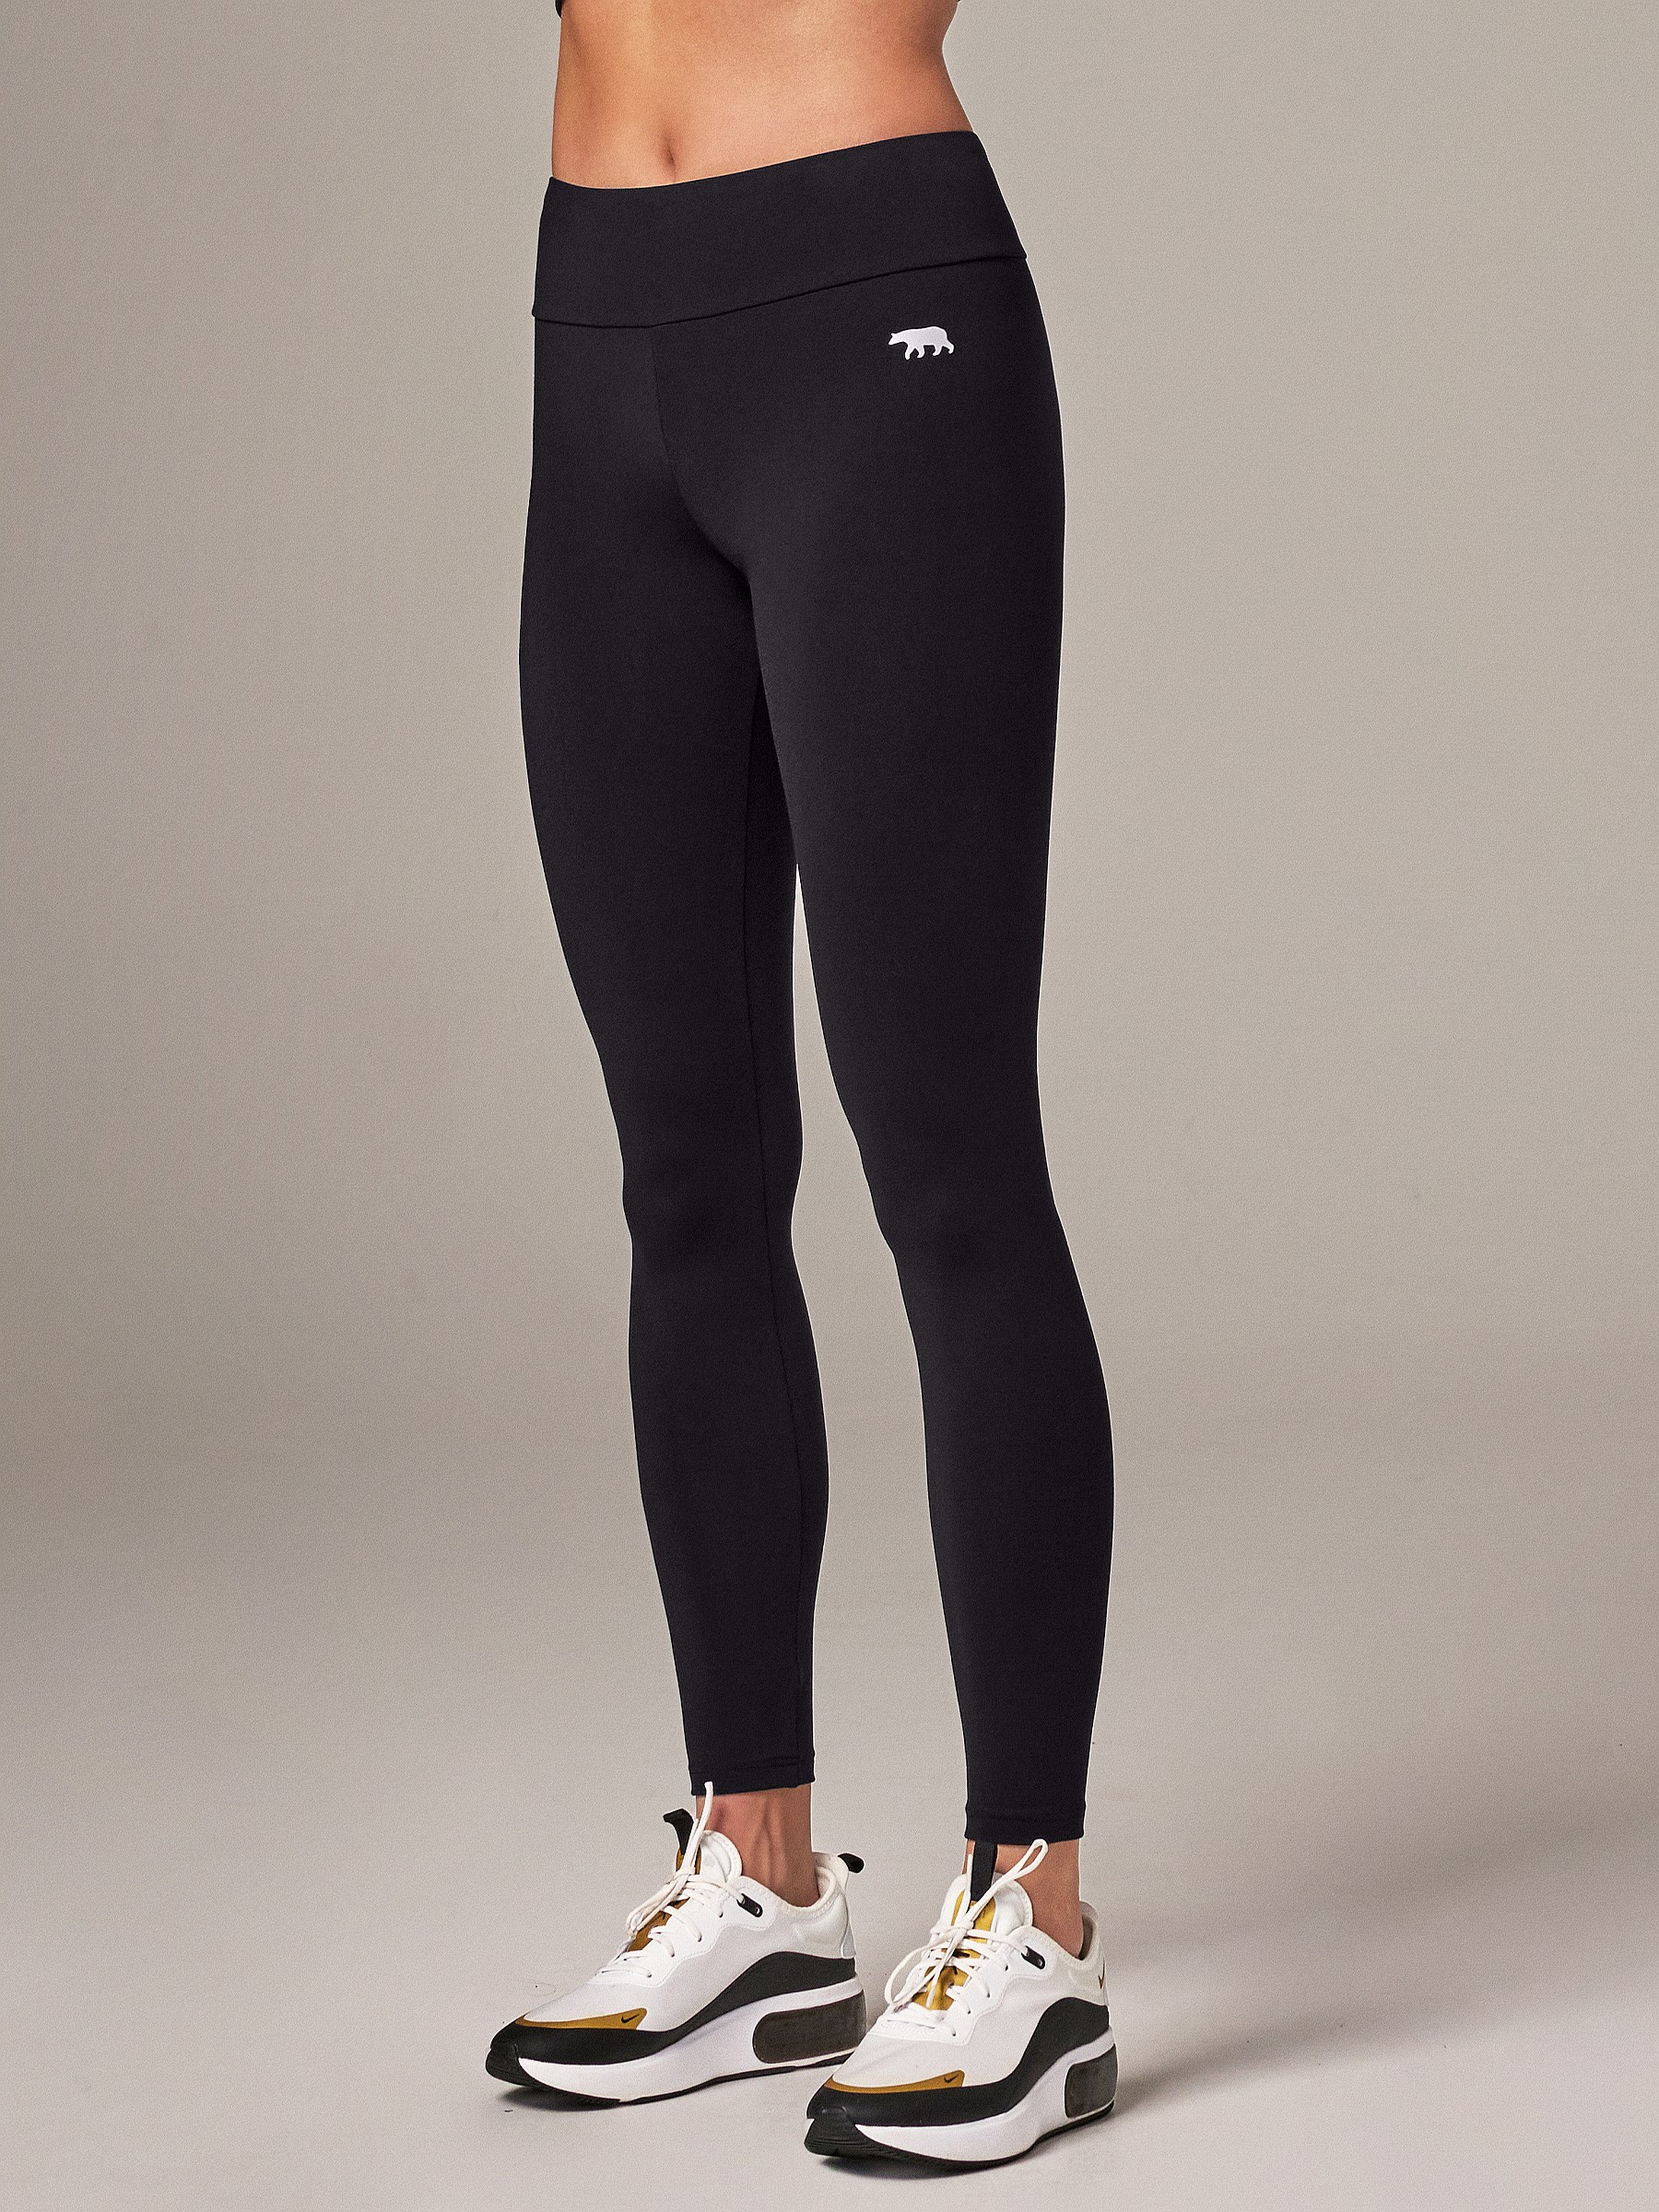 Womens High-Rise Black Leggings. Activewear by Running Bare.